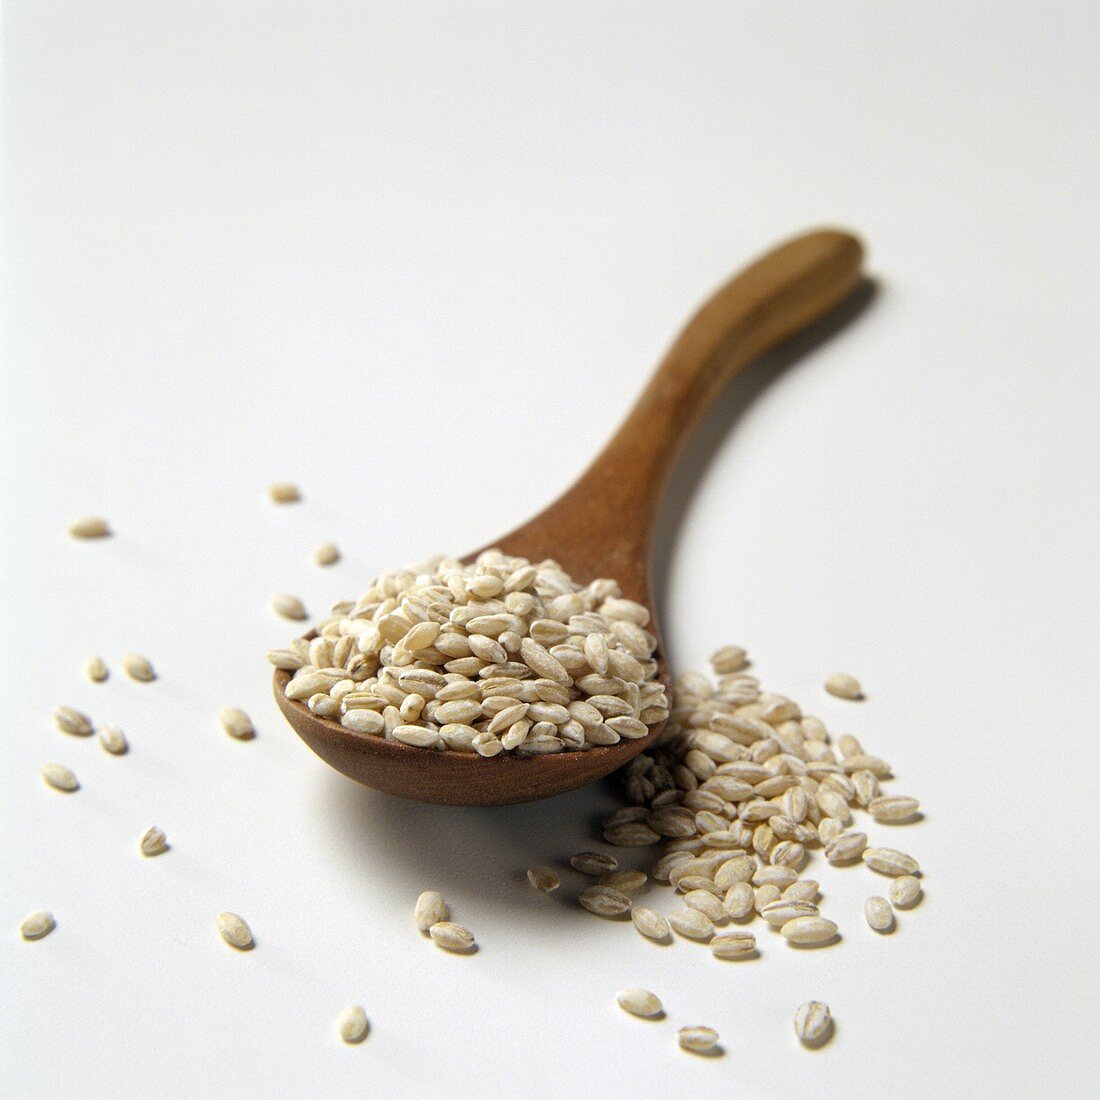 Pearl Barley on a Wooden Spoon